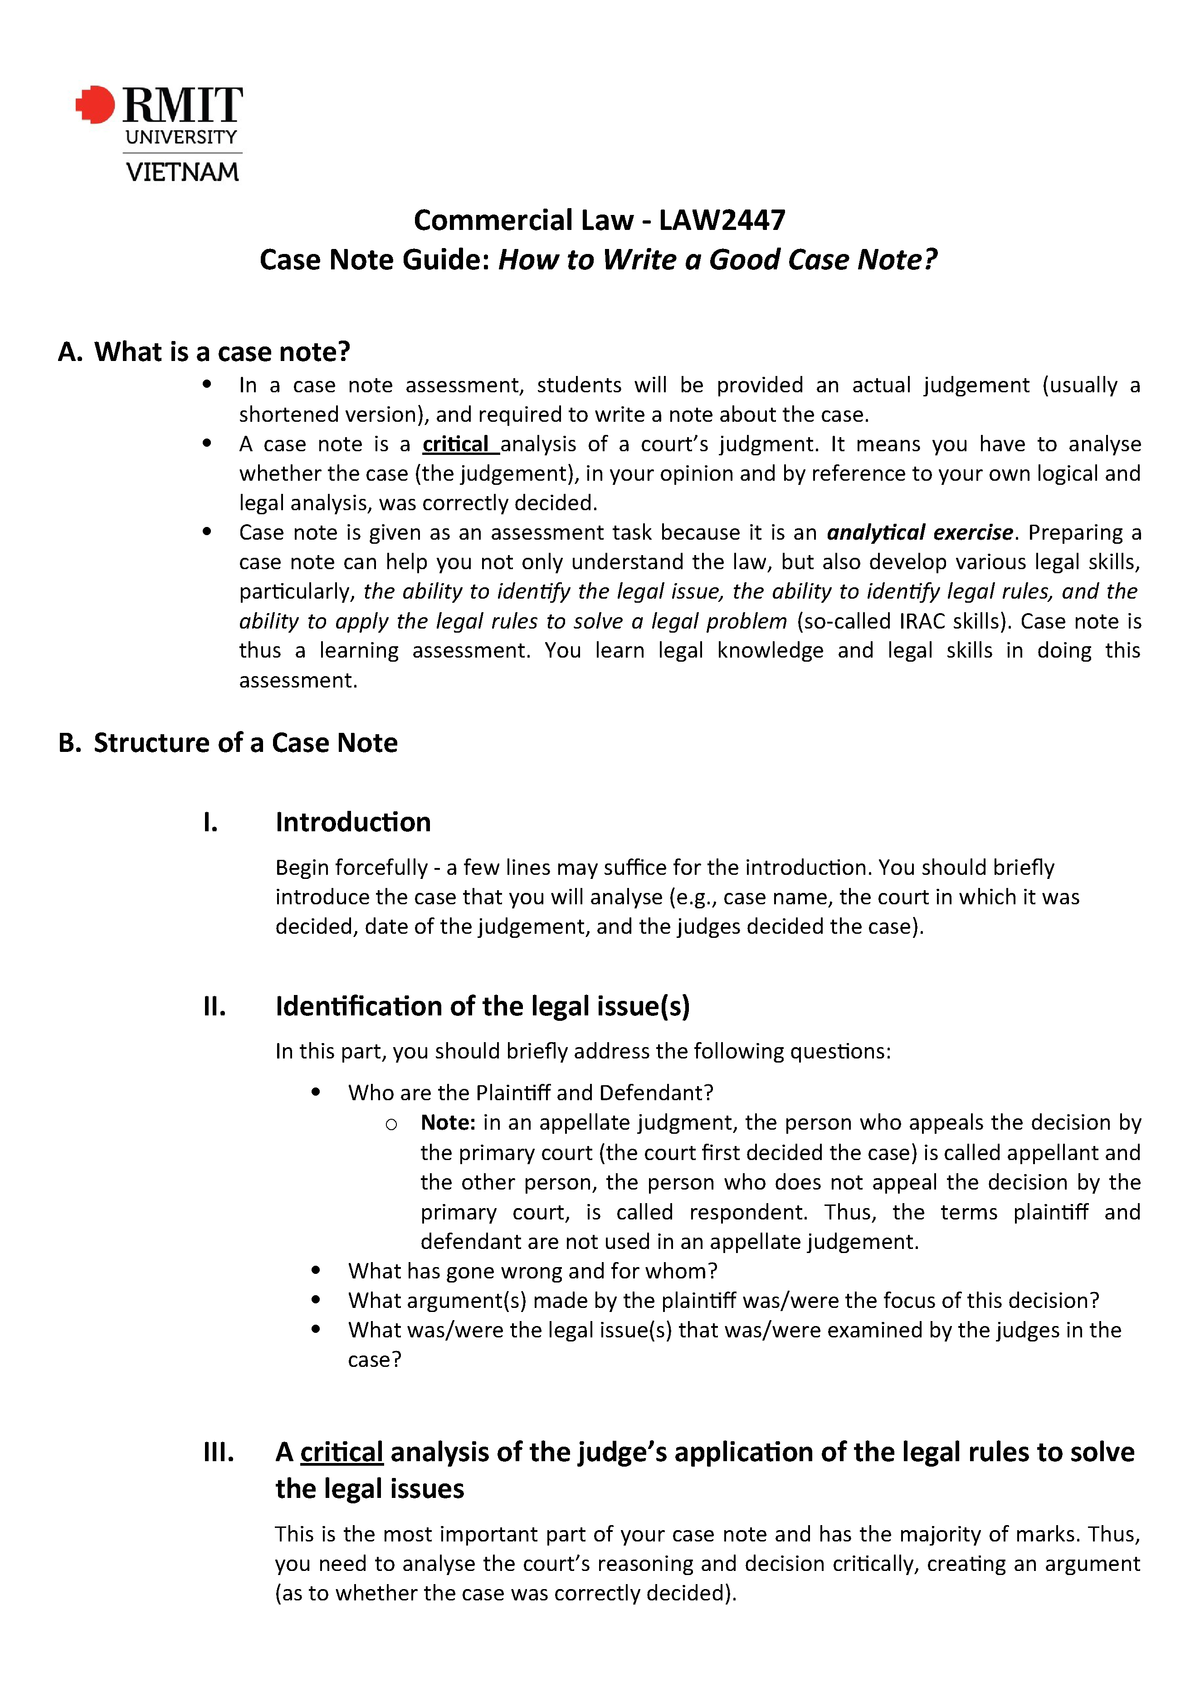 Case Note Guide - how to write a case note - LAW2446 - StuDocu